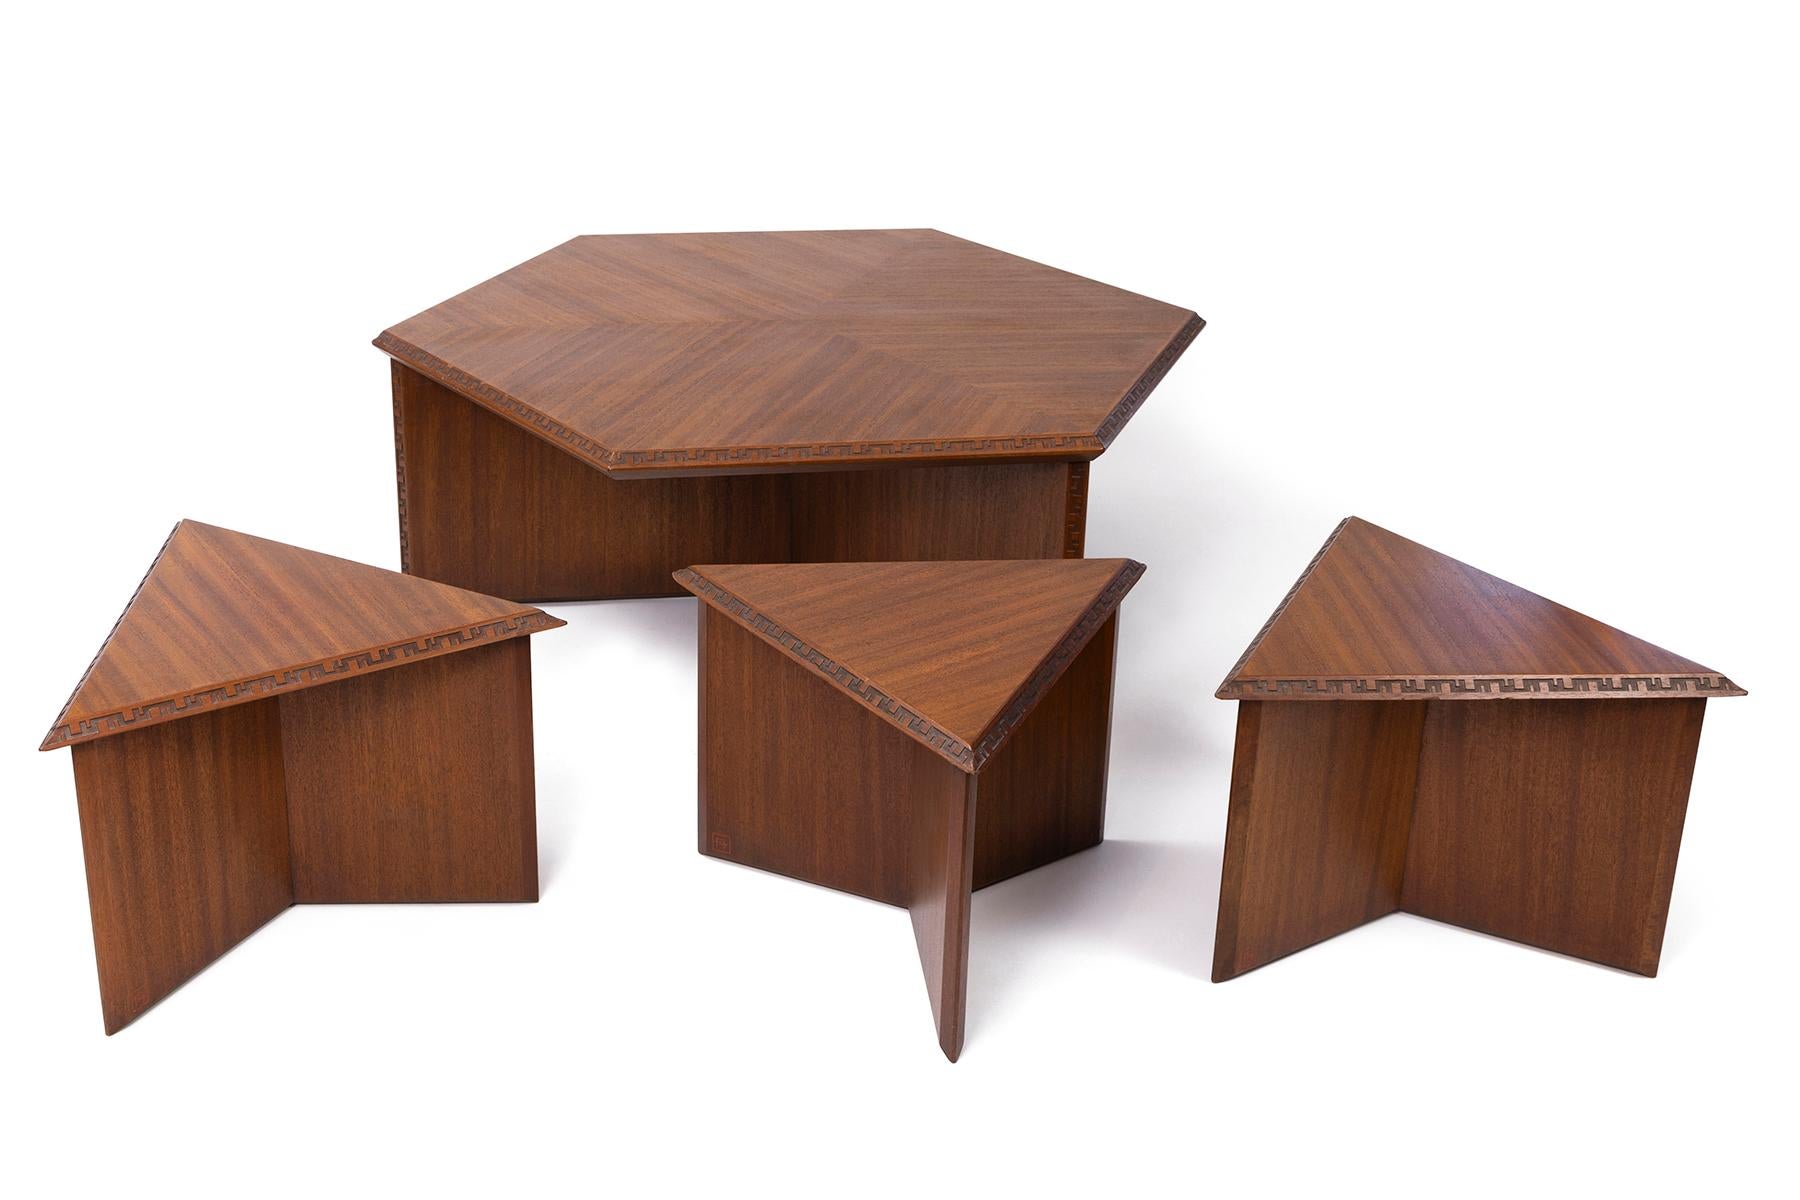 Frank Lloyd Wright for Heritage Henredon hexagonal coffee table and wedge side tables from 1956. These works were purchased from the original owners and retain their original finish. This line was only produced for 2 years and this particular